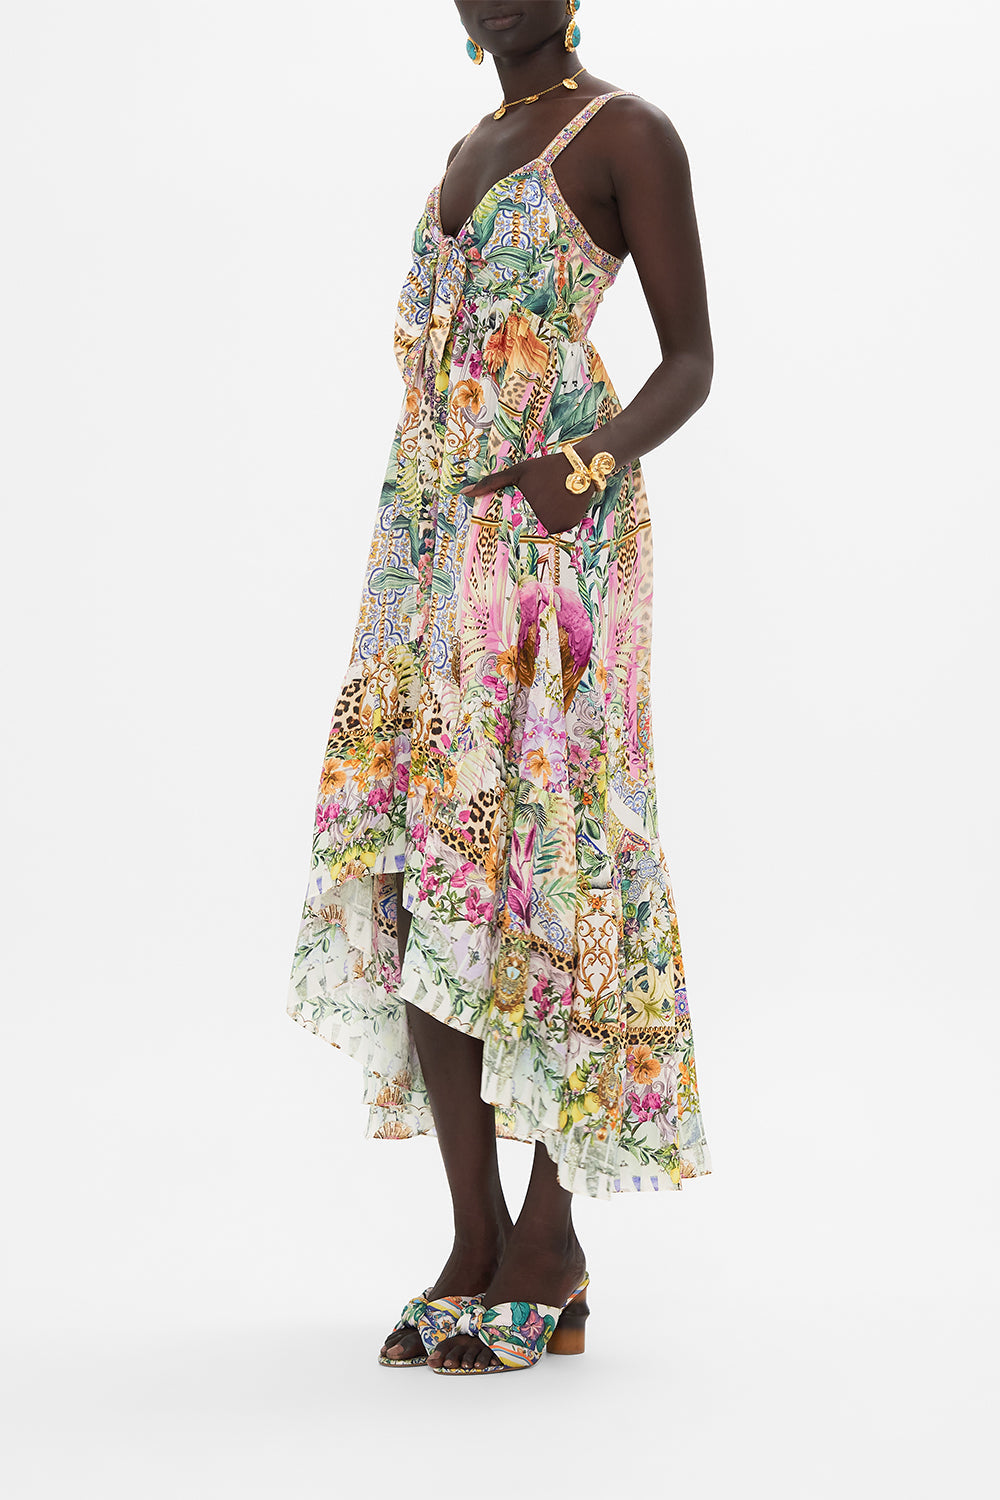 Side view of model wearing CAMILLA floral silk dress in Flowers Of Neptune print